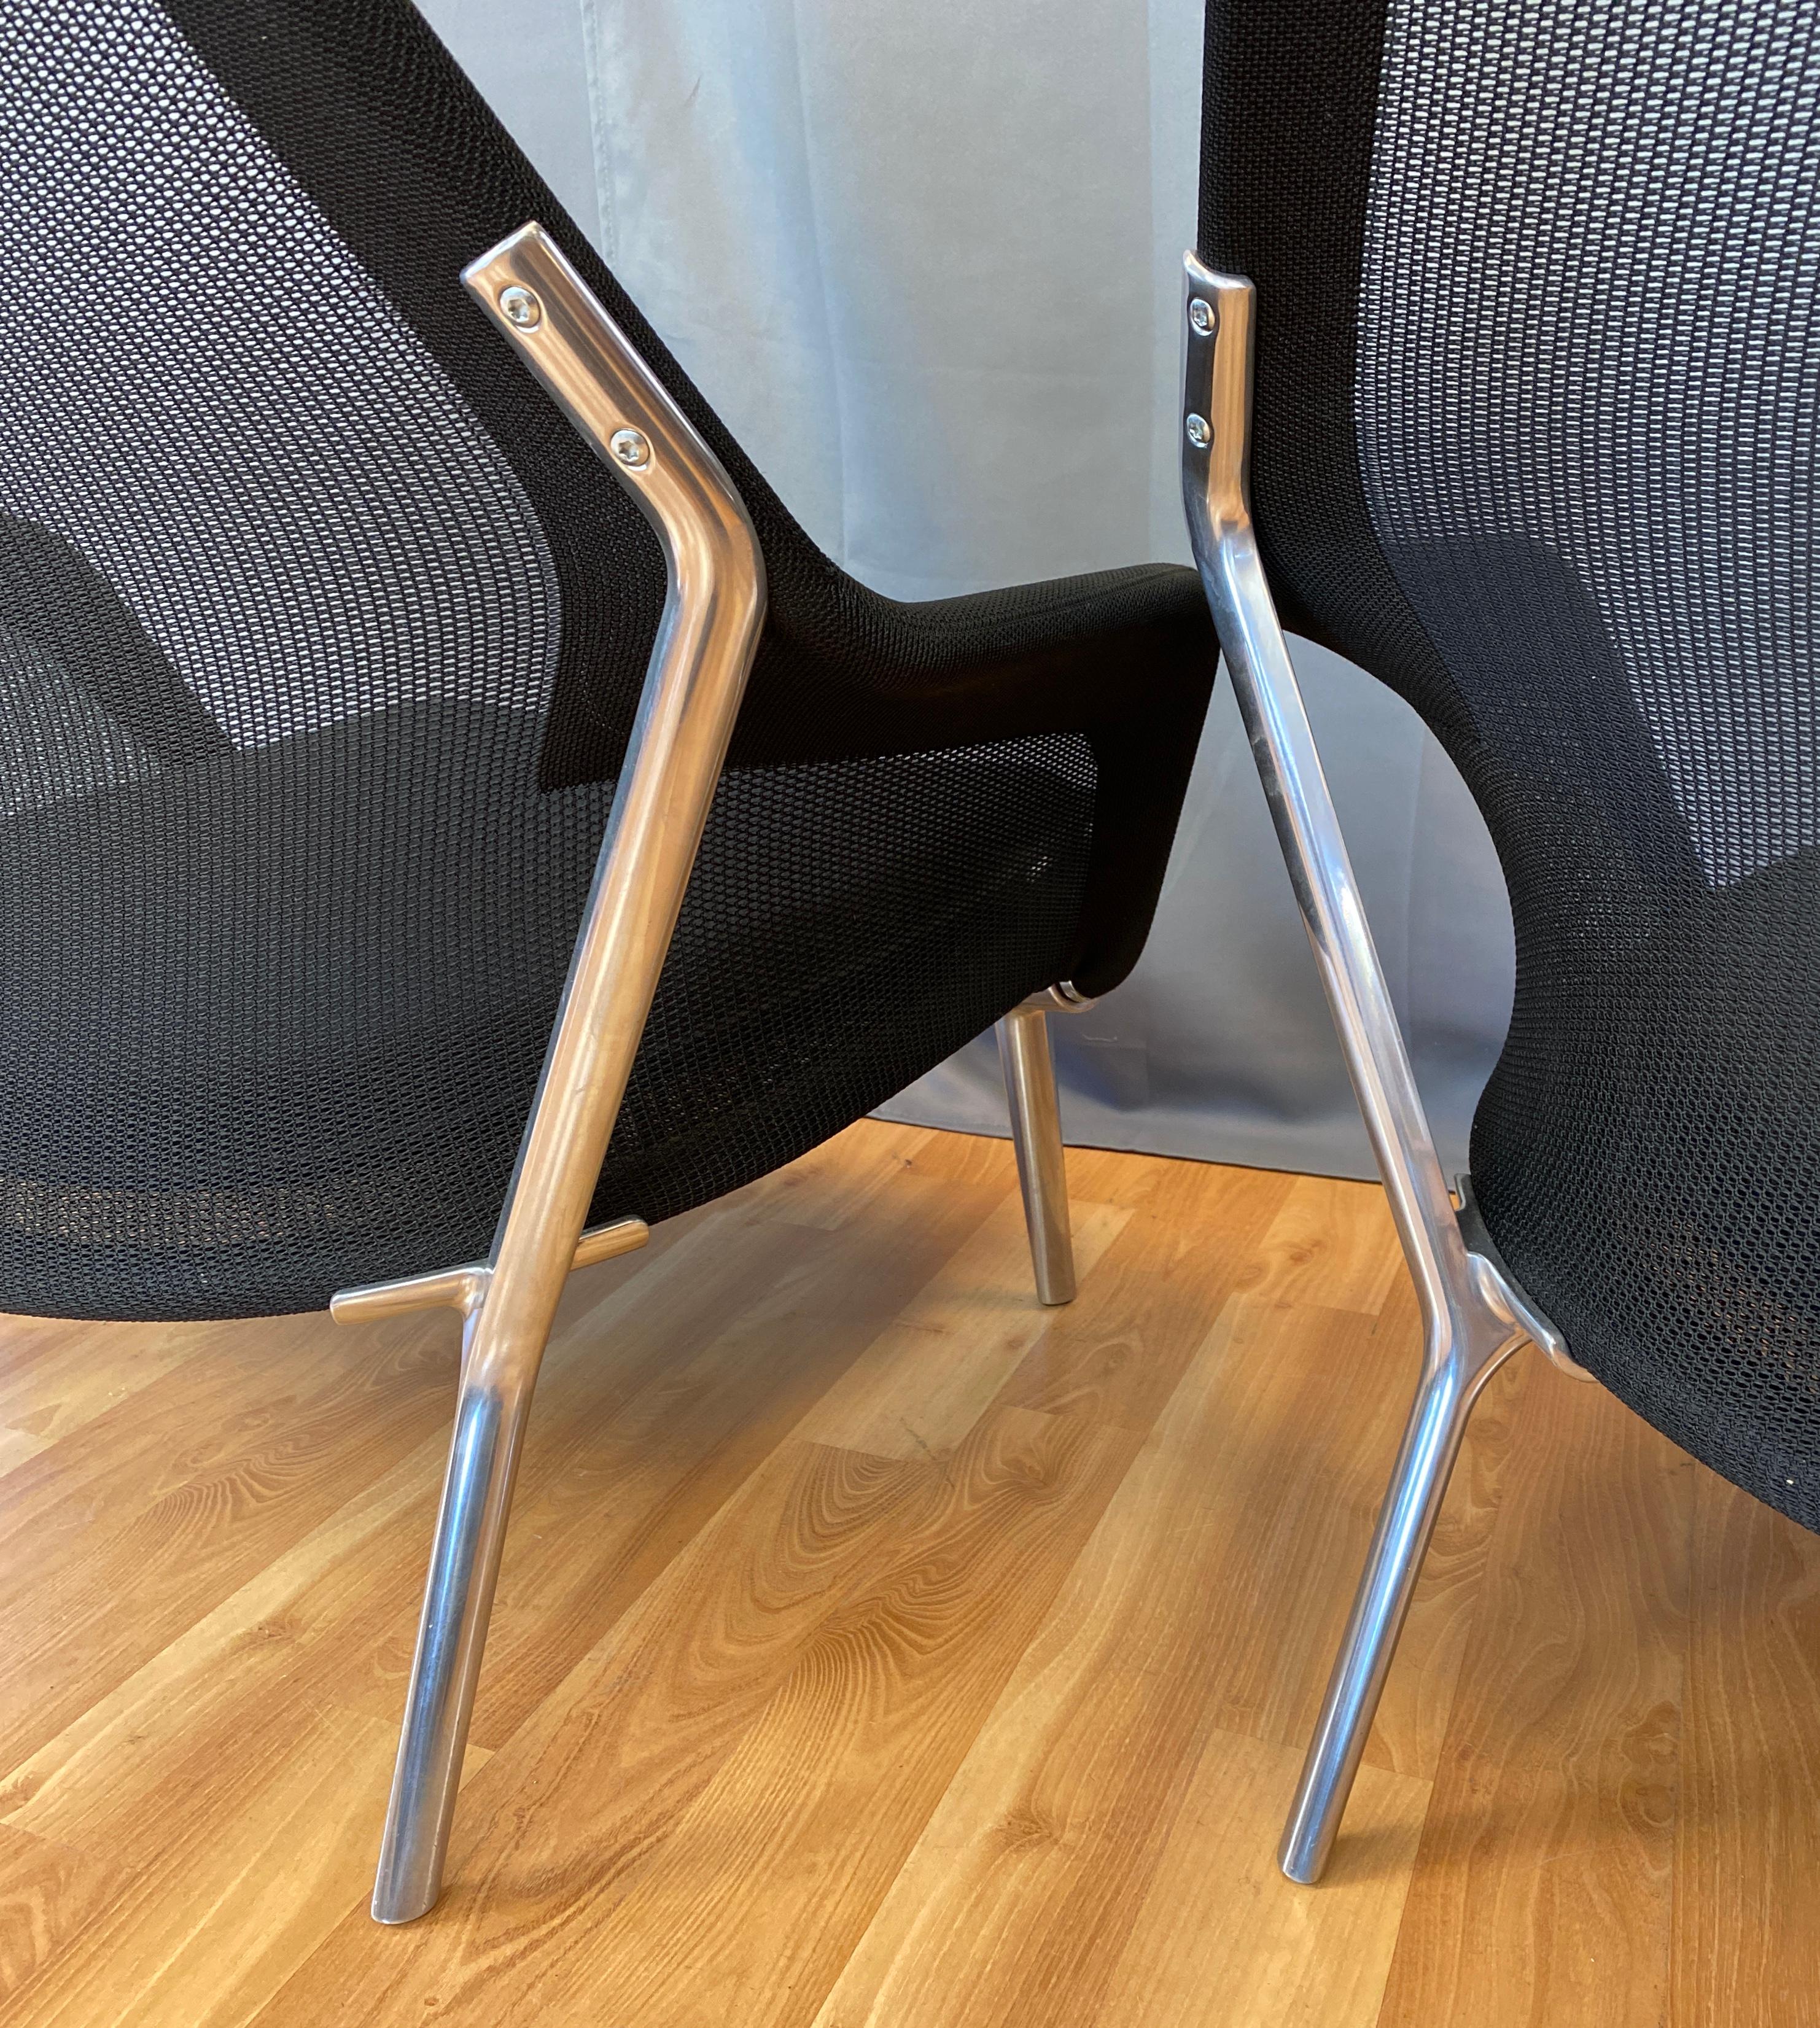 Polished Pair of Black Slow Chairs by Ronan and Erwan Bouroullec for Vitra